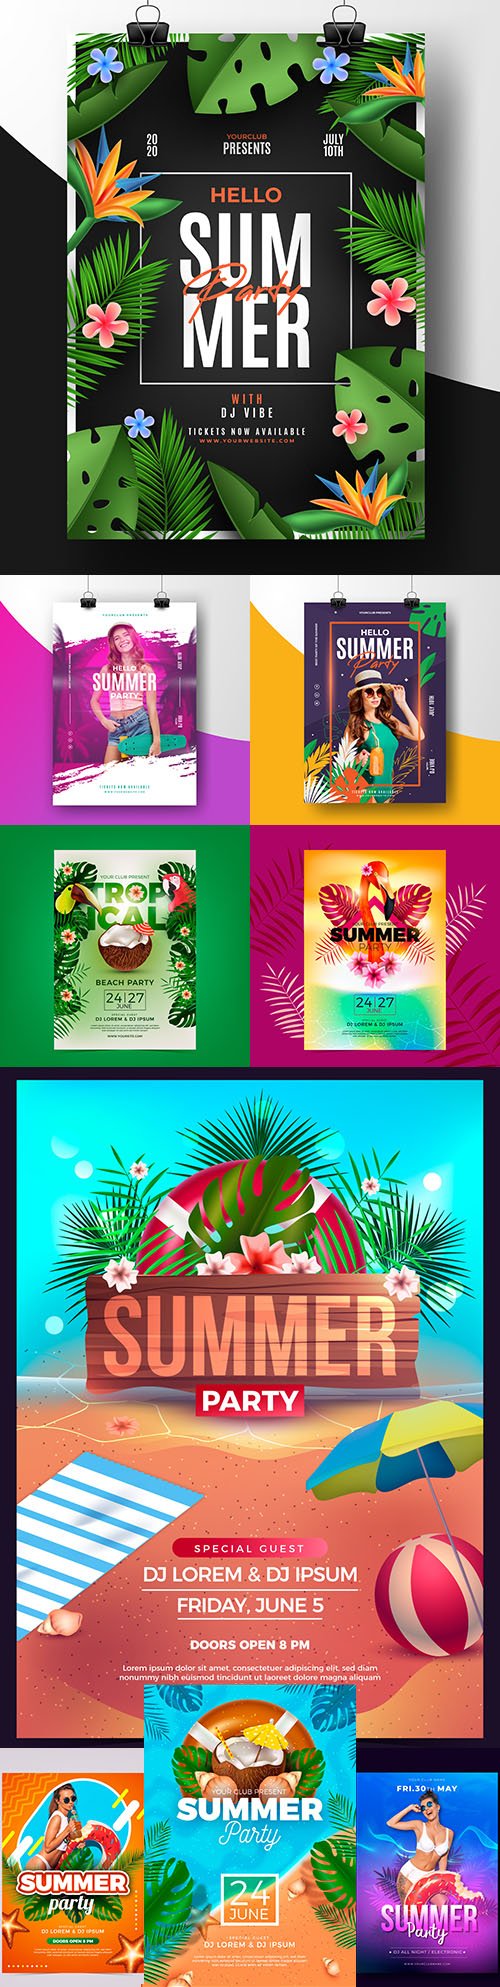 Summer tropical party with illustrations poster template